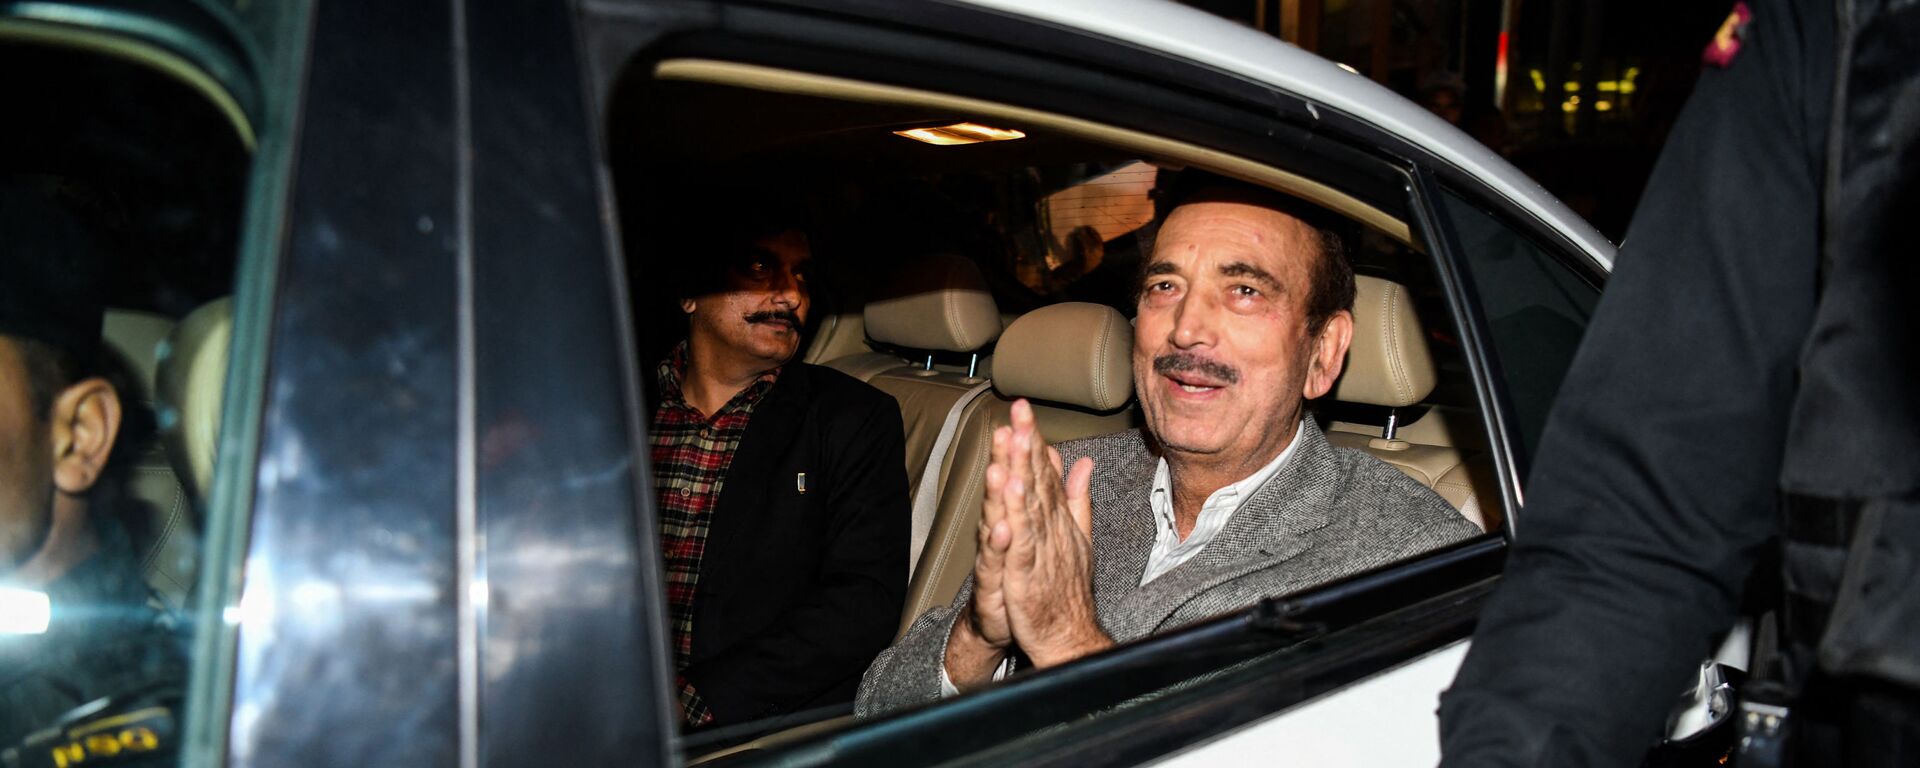 Indian politician of the Indian National Congress Ghulam Nabi Azad gestures as he leaves the Ministry of Foreign Affairs after an all party meeting called by Indian Minister of External Affairs Sushma Swaraj, in New Delhi on February 26, 2019 - Sputnik International, 1920, 30.08.2022